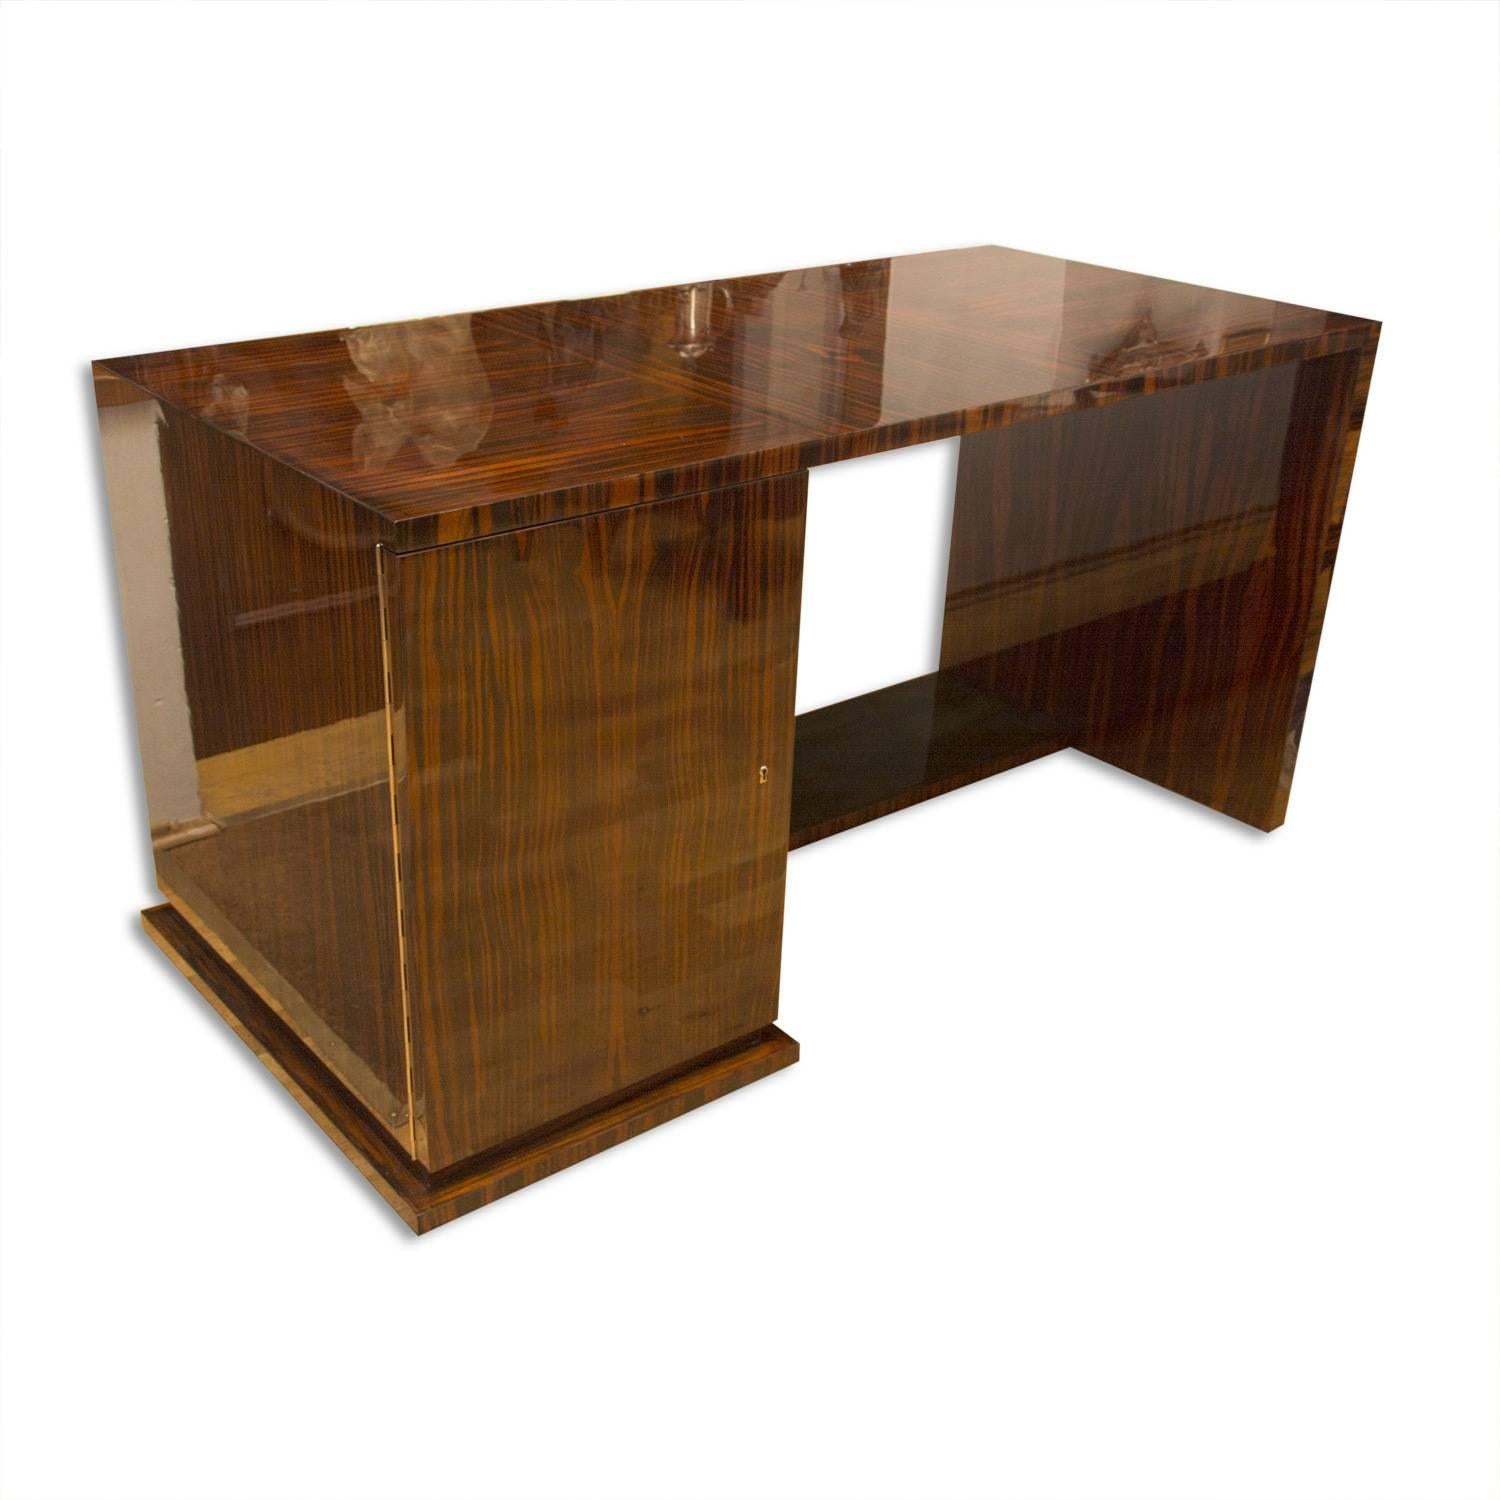 Functionalist macassar writing desk designed and produced in the 1930s by the famous Prague architect Vlastimil Brozek. It features a regular shaped typical for Functionalism in the 1930s. The desk was created by an architect for its own